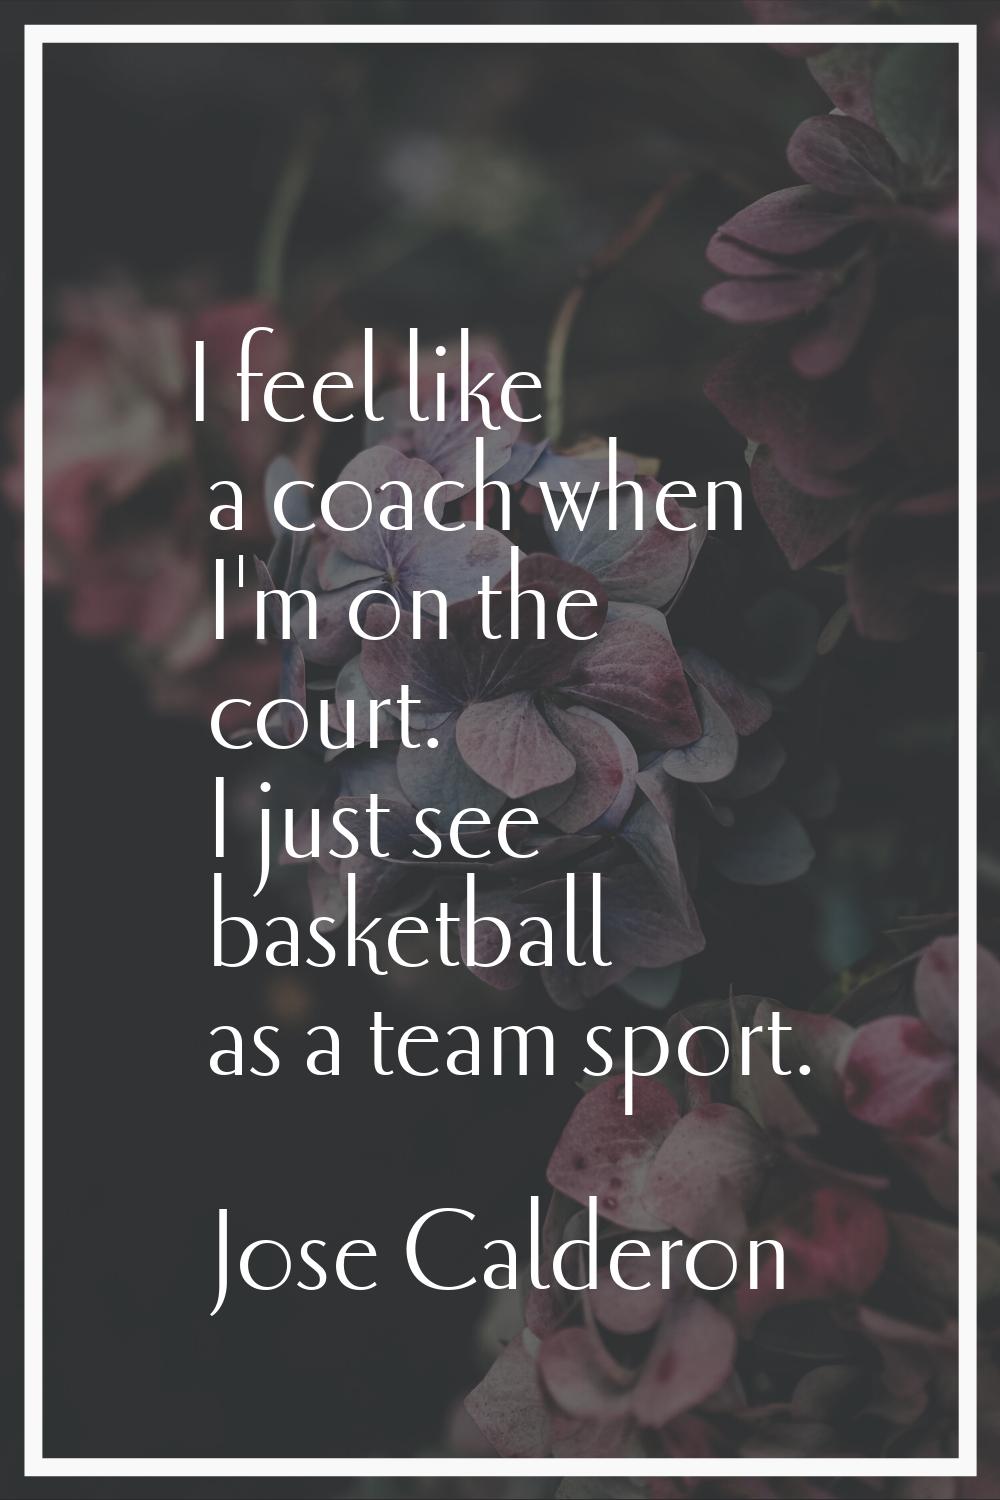 I feel like a coach when I'm on the court. I just see basketball as a team sport.